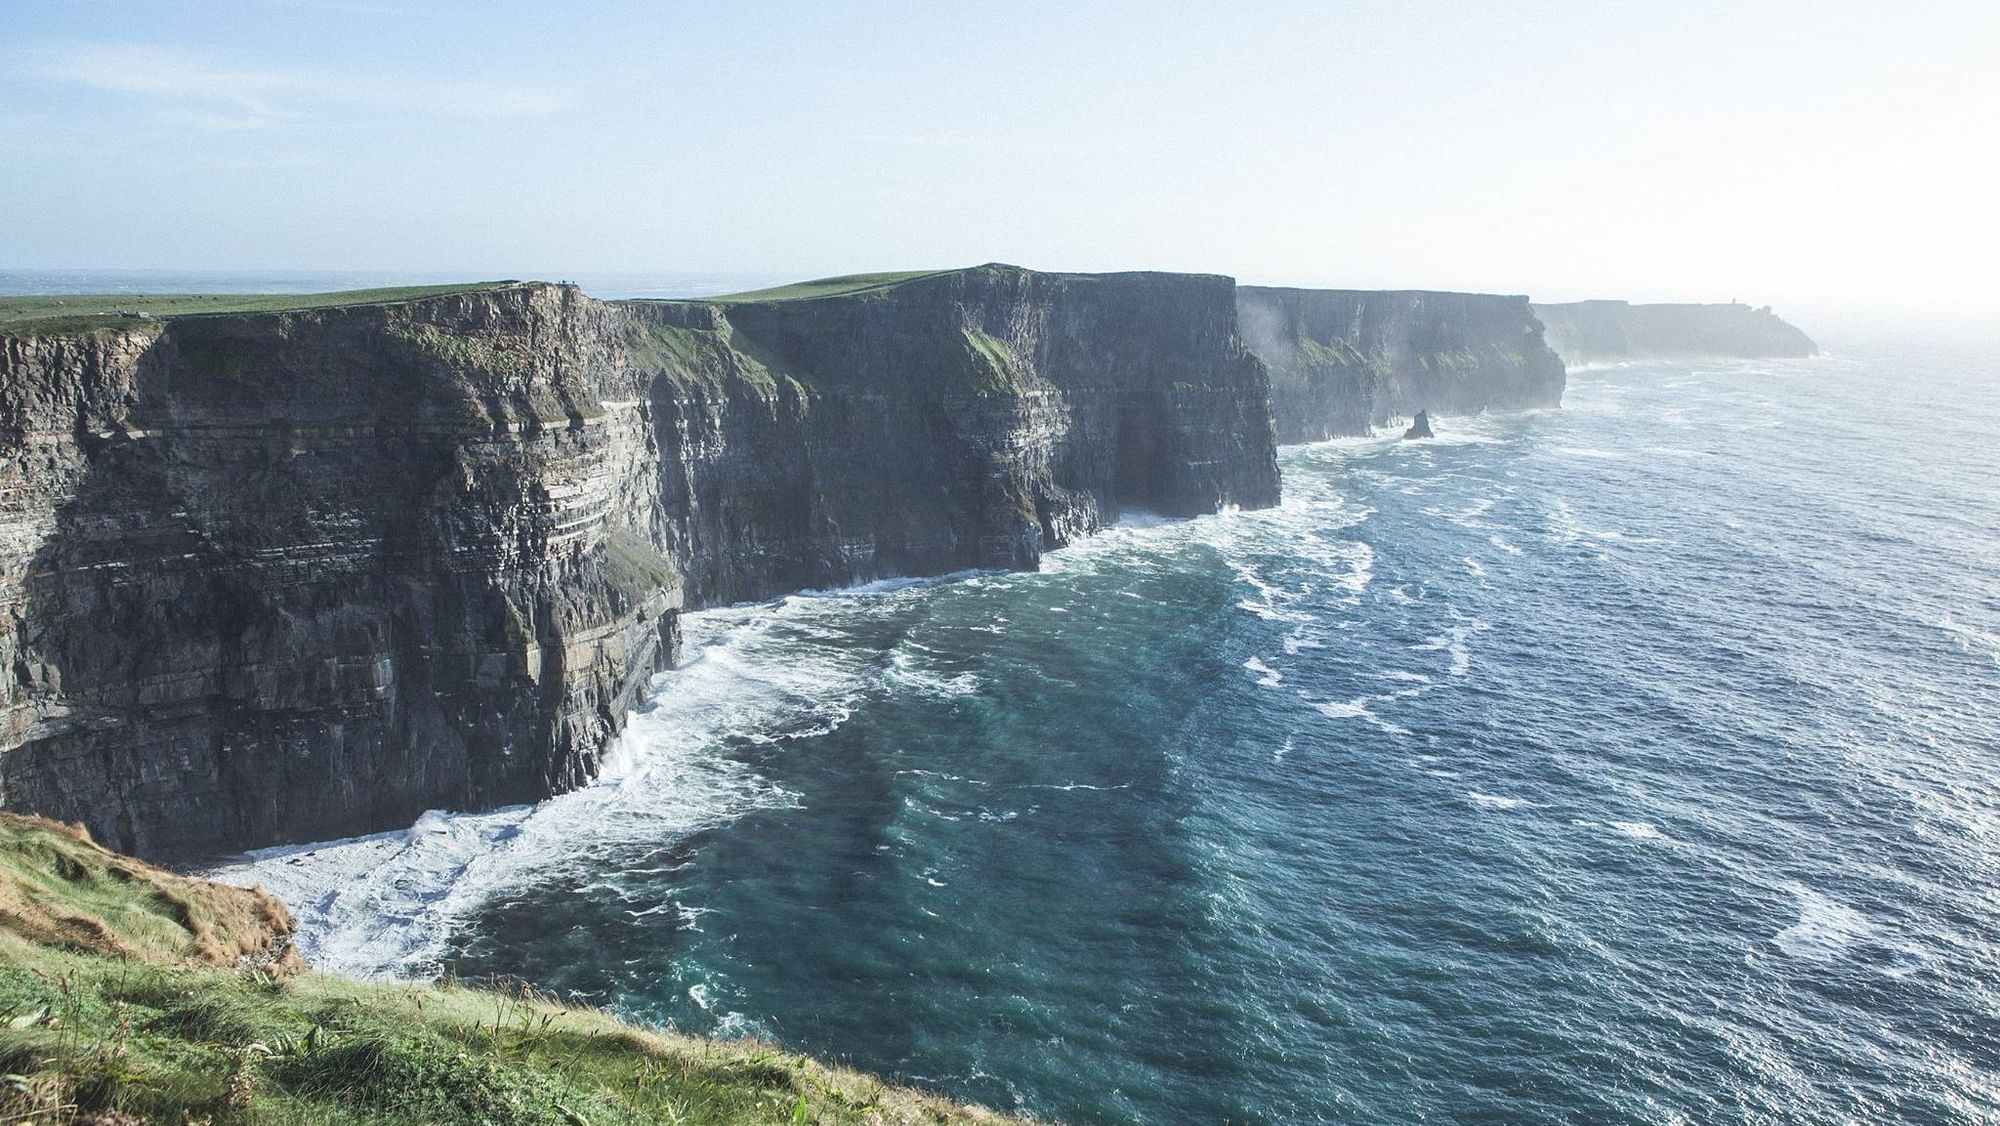 An Indian student died after falling from the edge of the famous Cliffs of Moher in Ireland.